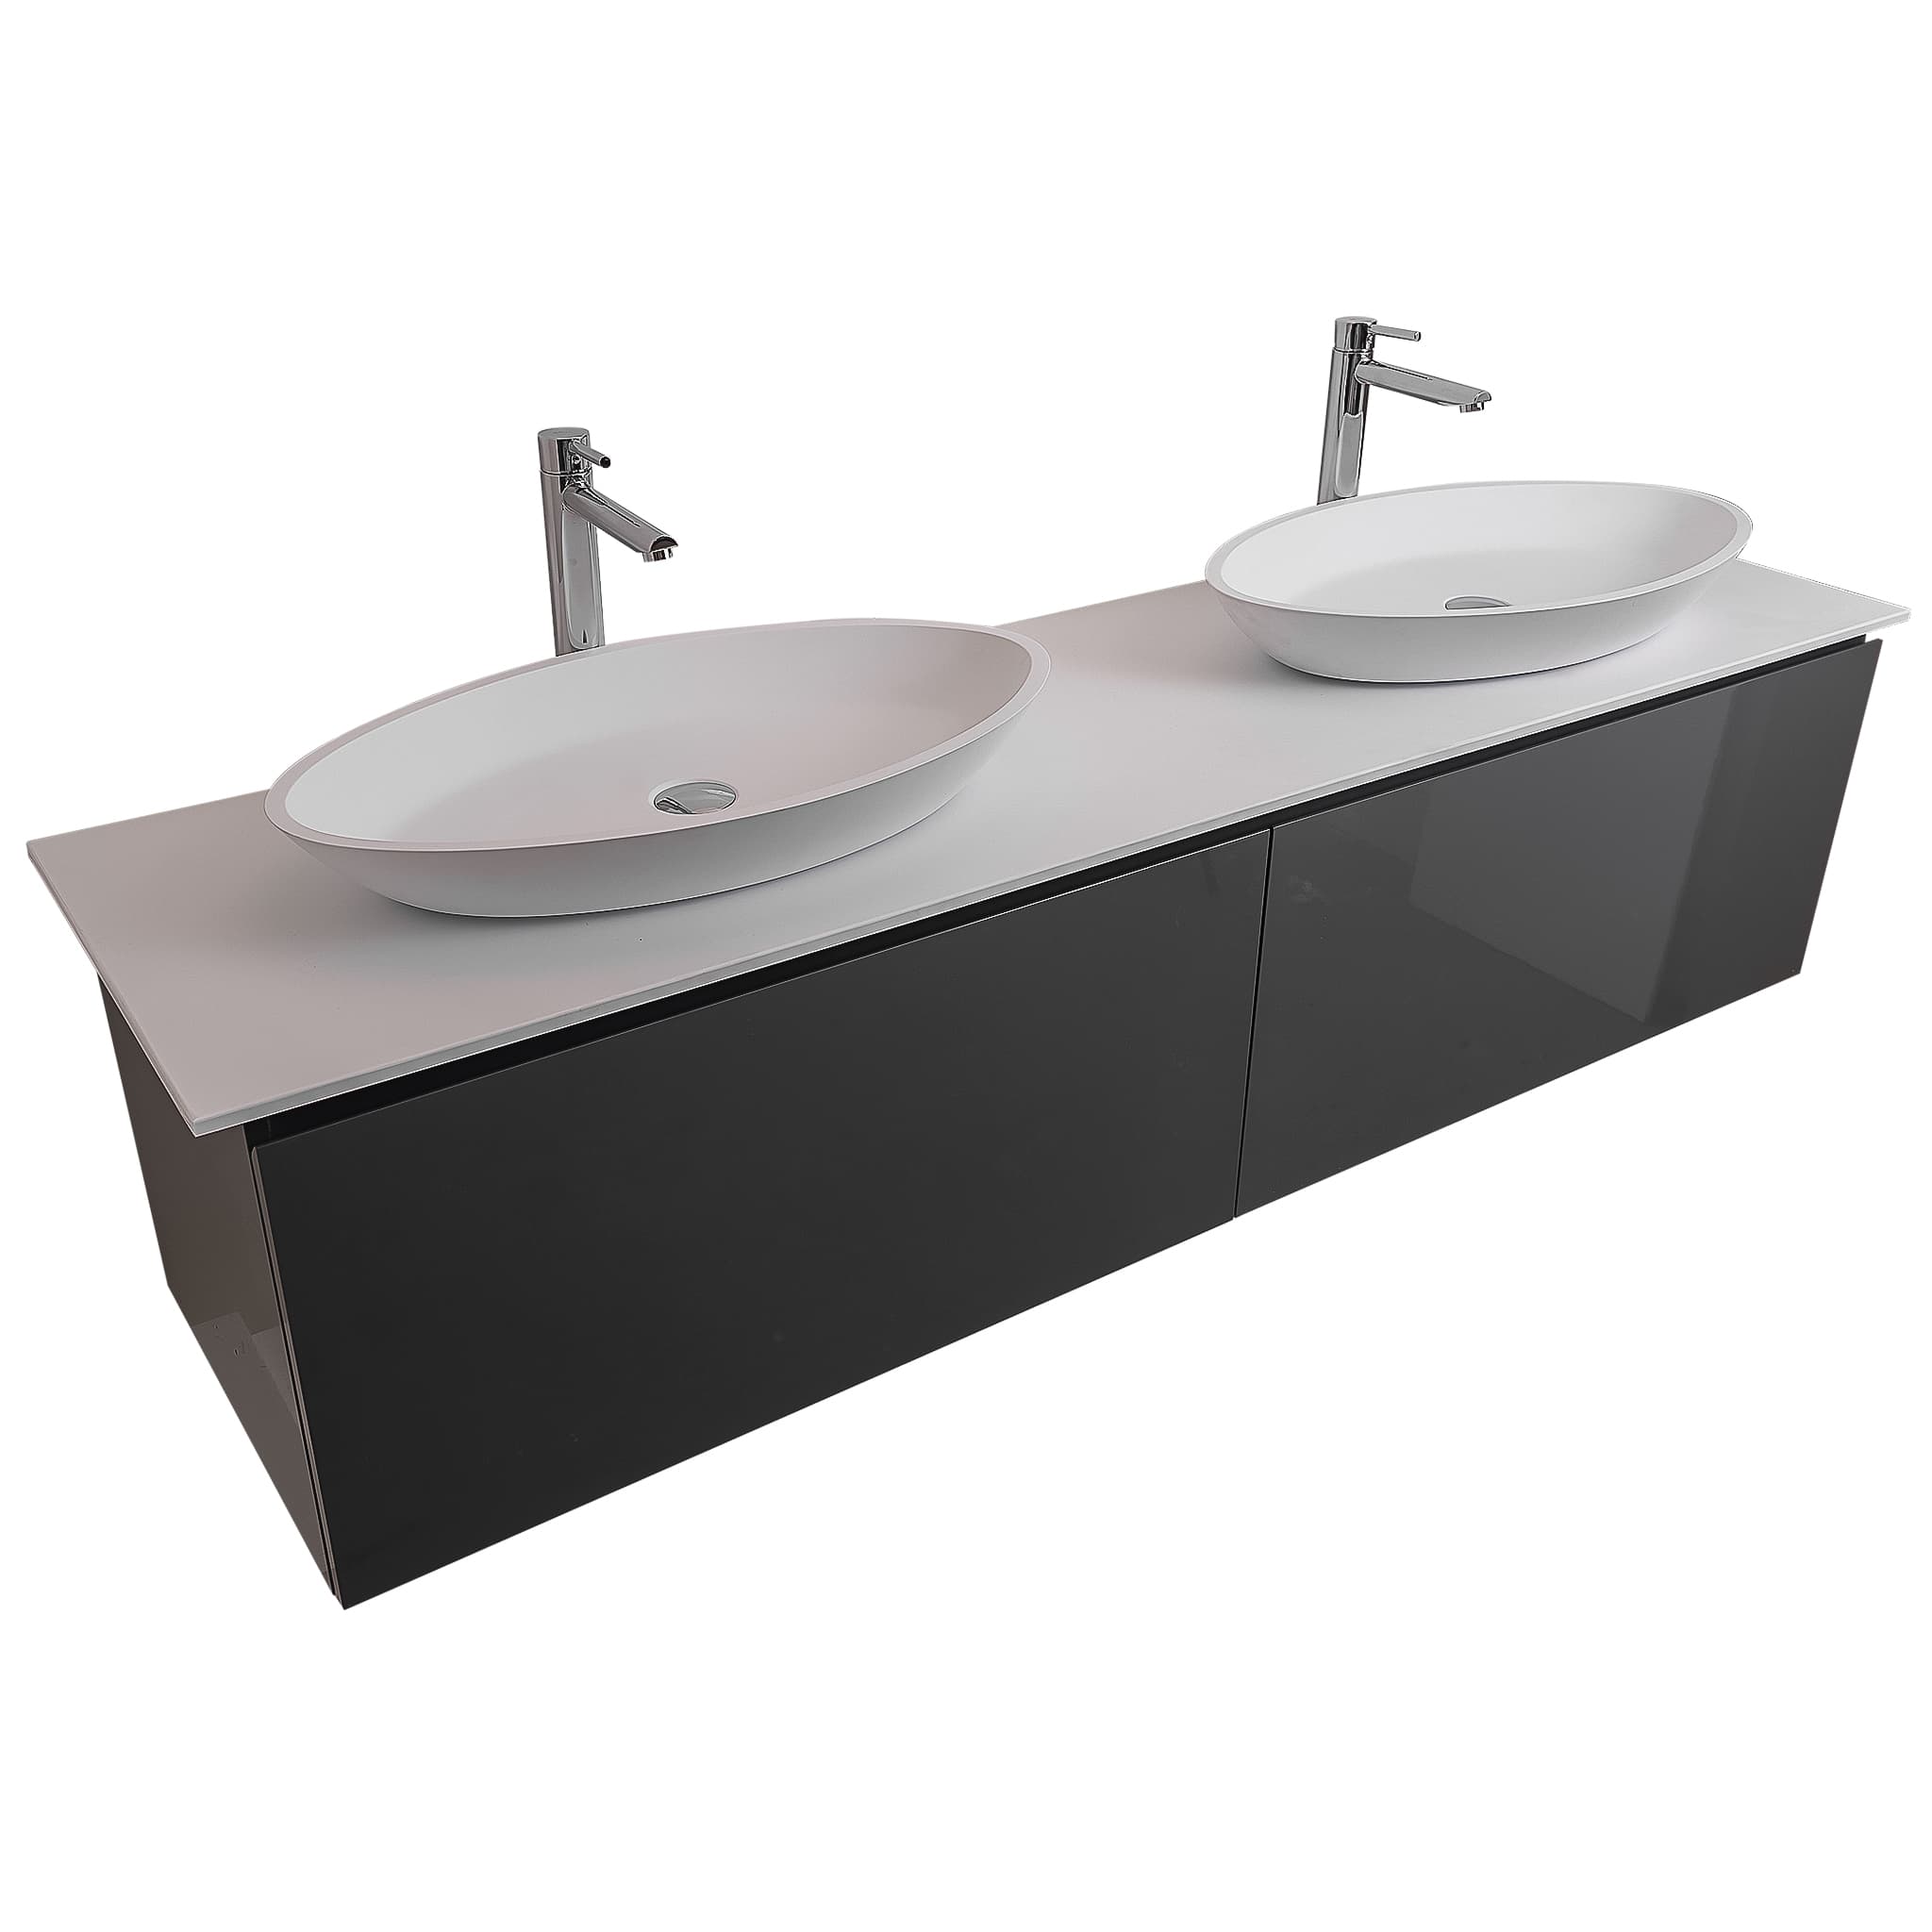 Venice 72 Anthracite High Gloss Cabinet, Solid Surface Flat White Counter And Two Oval Solid Surface White Basin 1305, Wall Mounted Modern Vanity Set